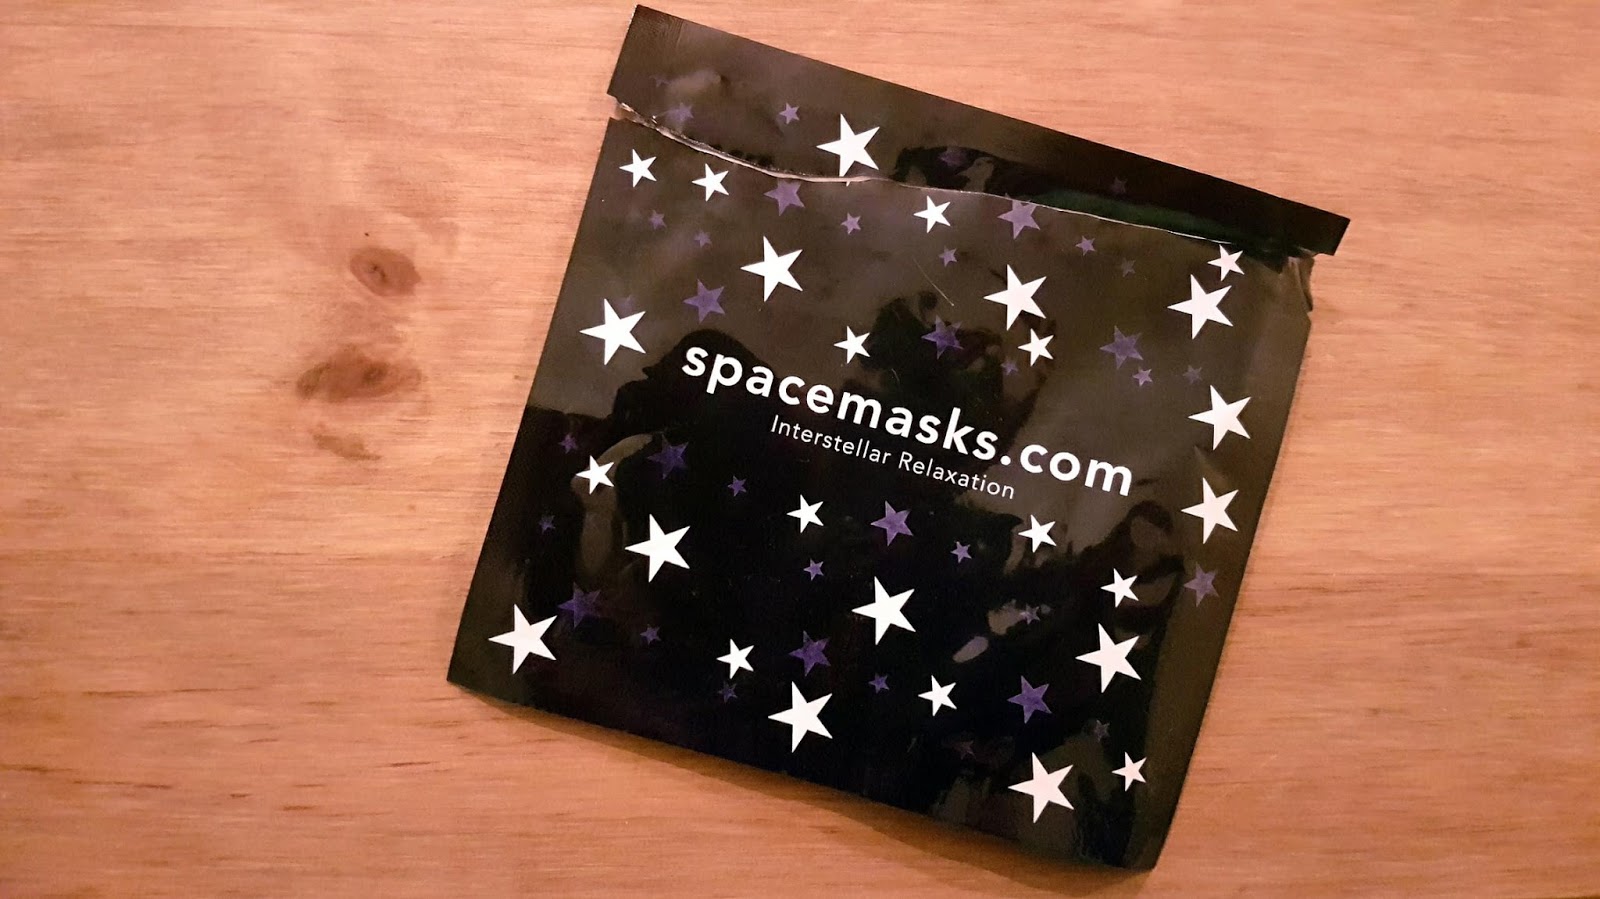 Gangster anmodning Stolthed Spacemasks Review: Interstellar Relaxation - The ecoLogical